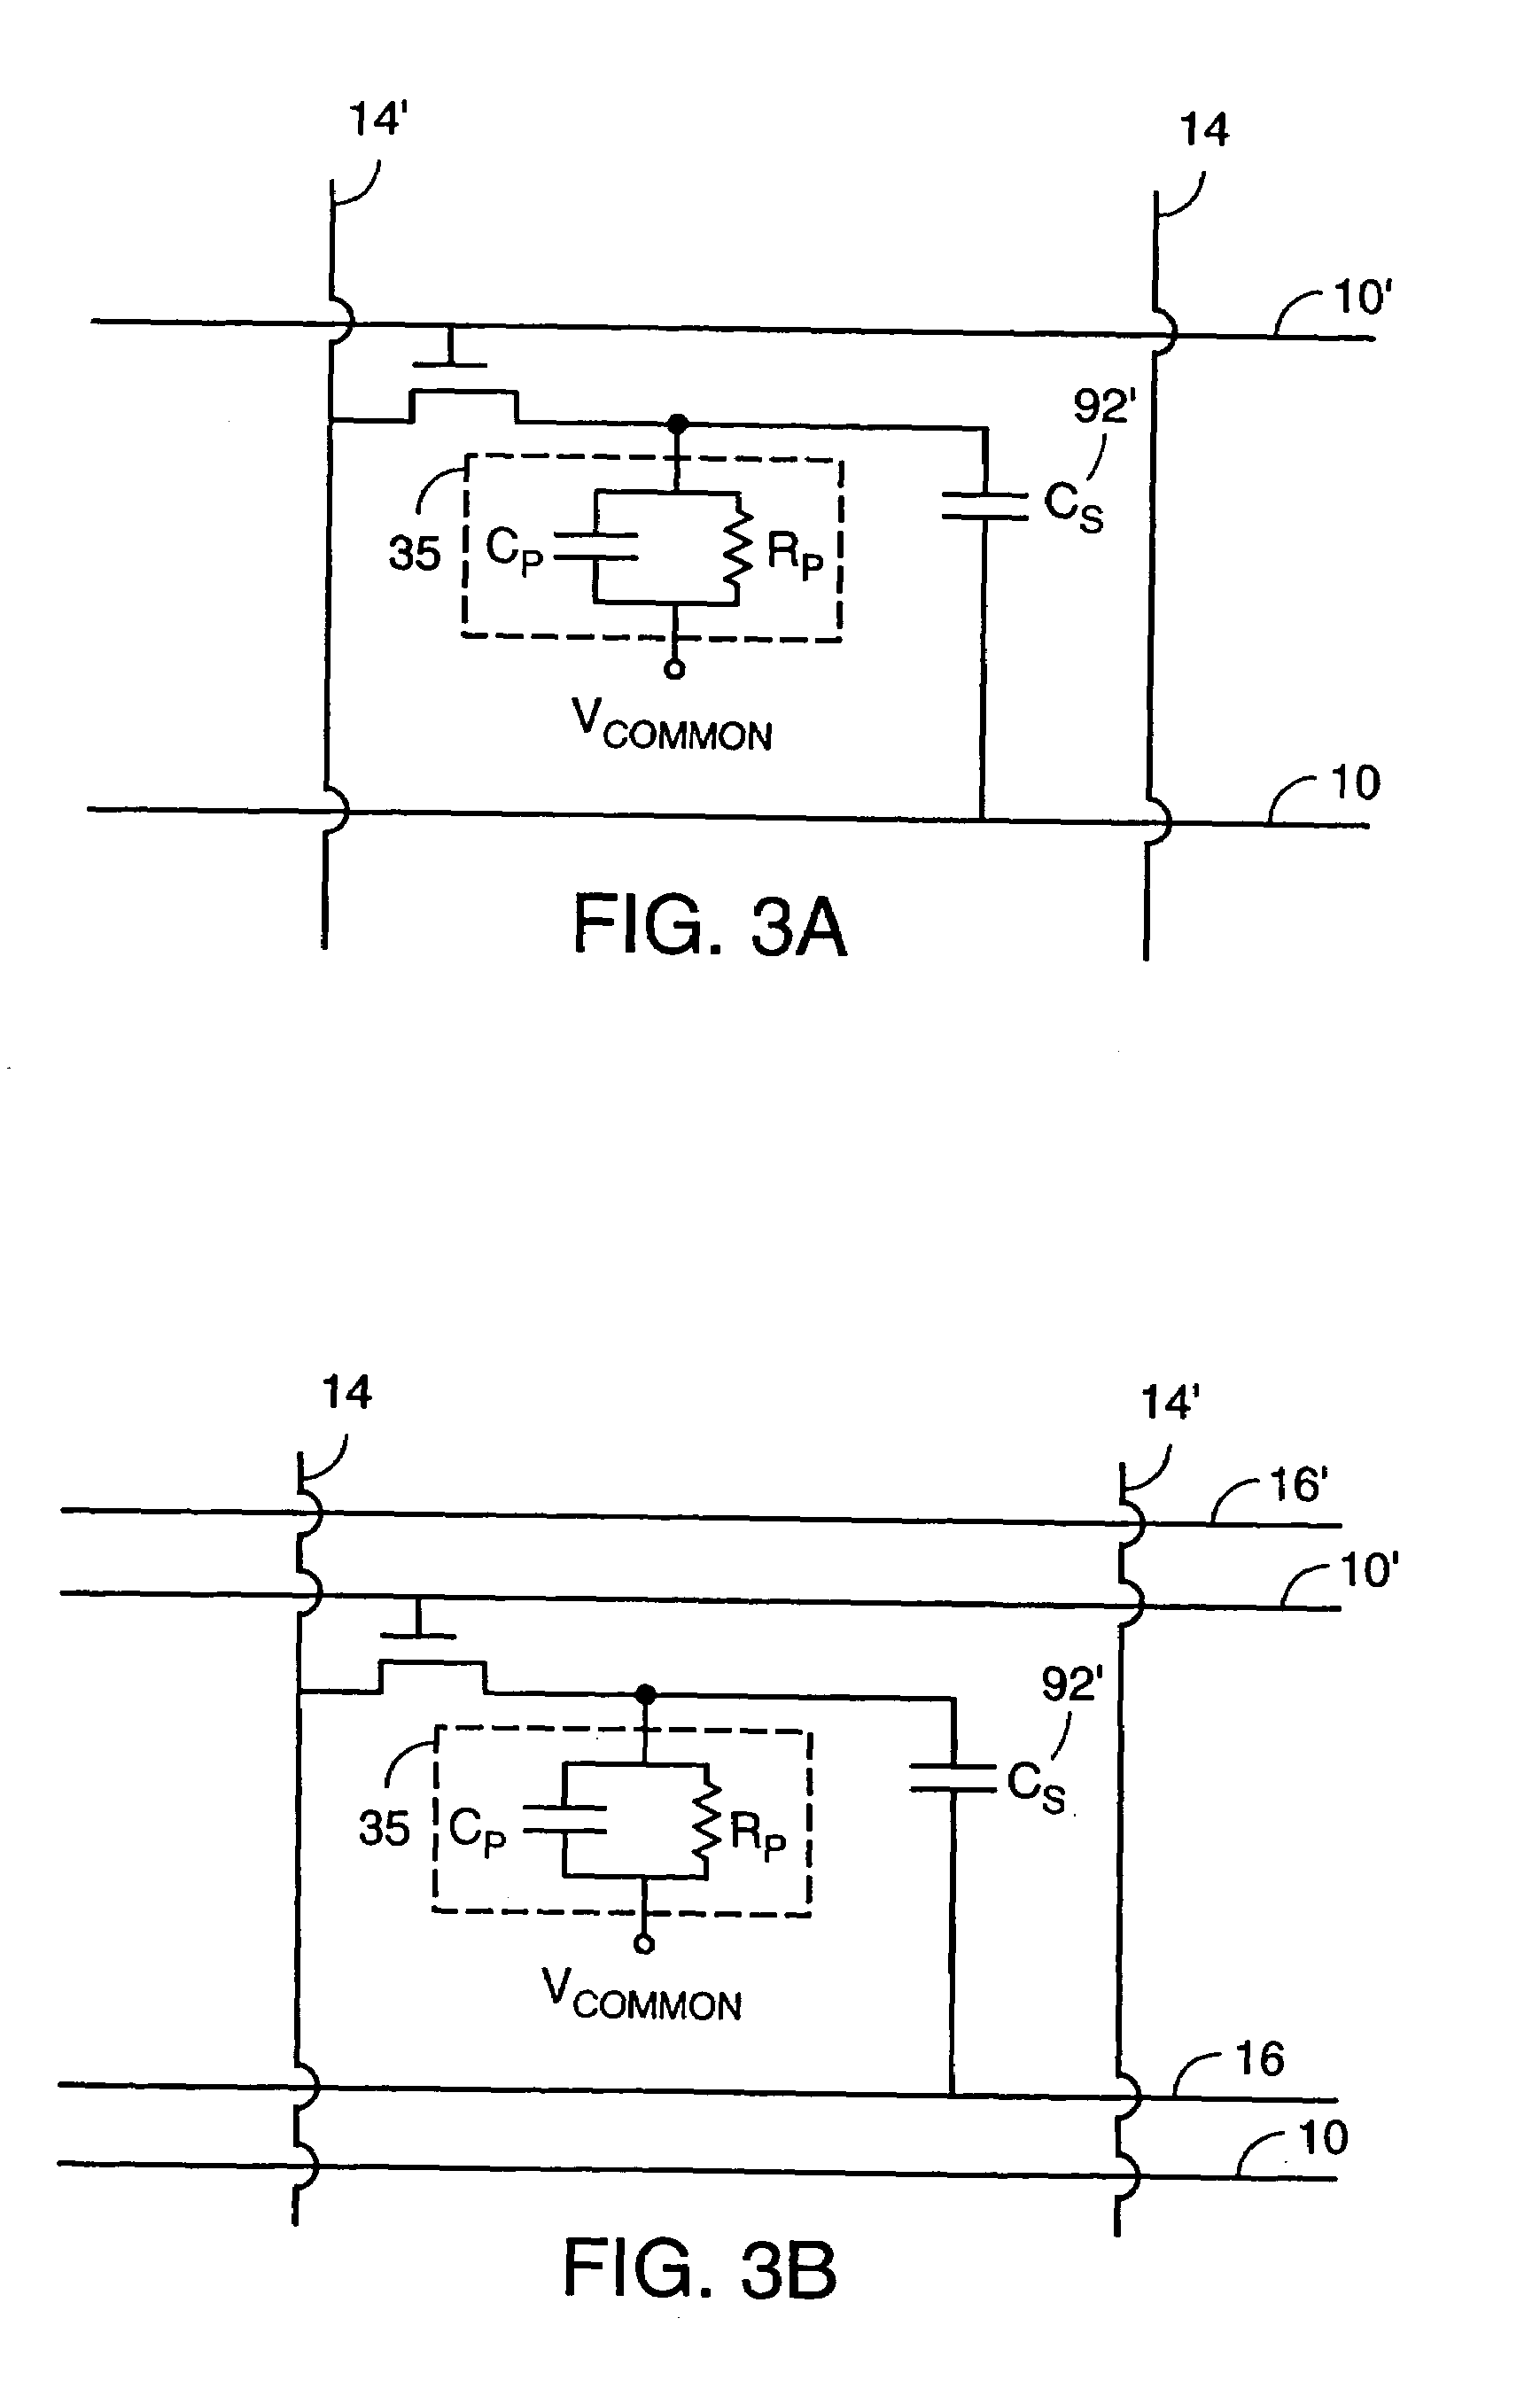 Use of a storage capacitor to enhance the performance of an active matrix driven electronic display